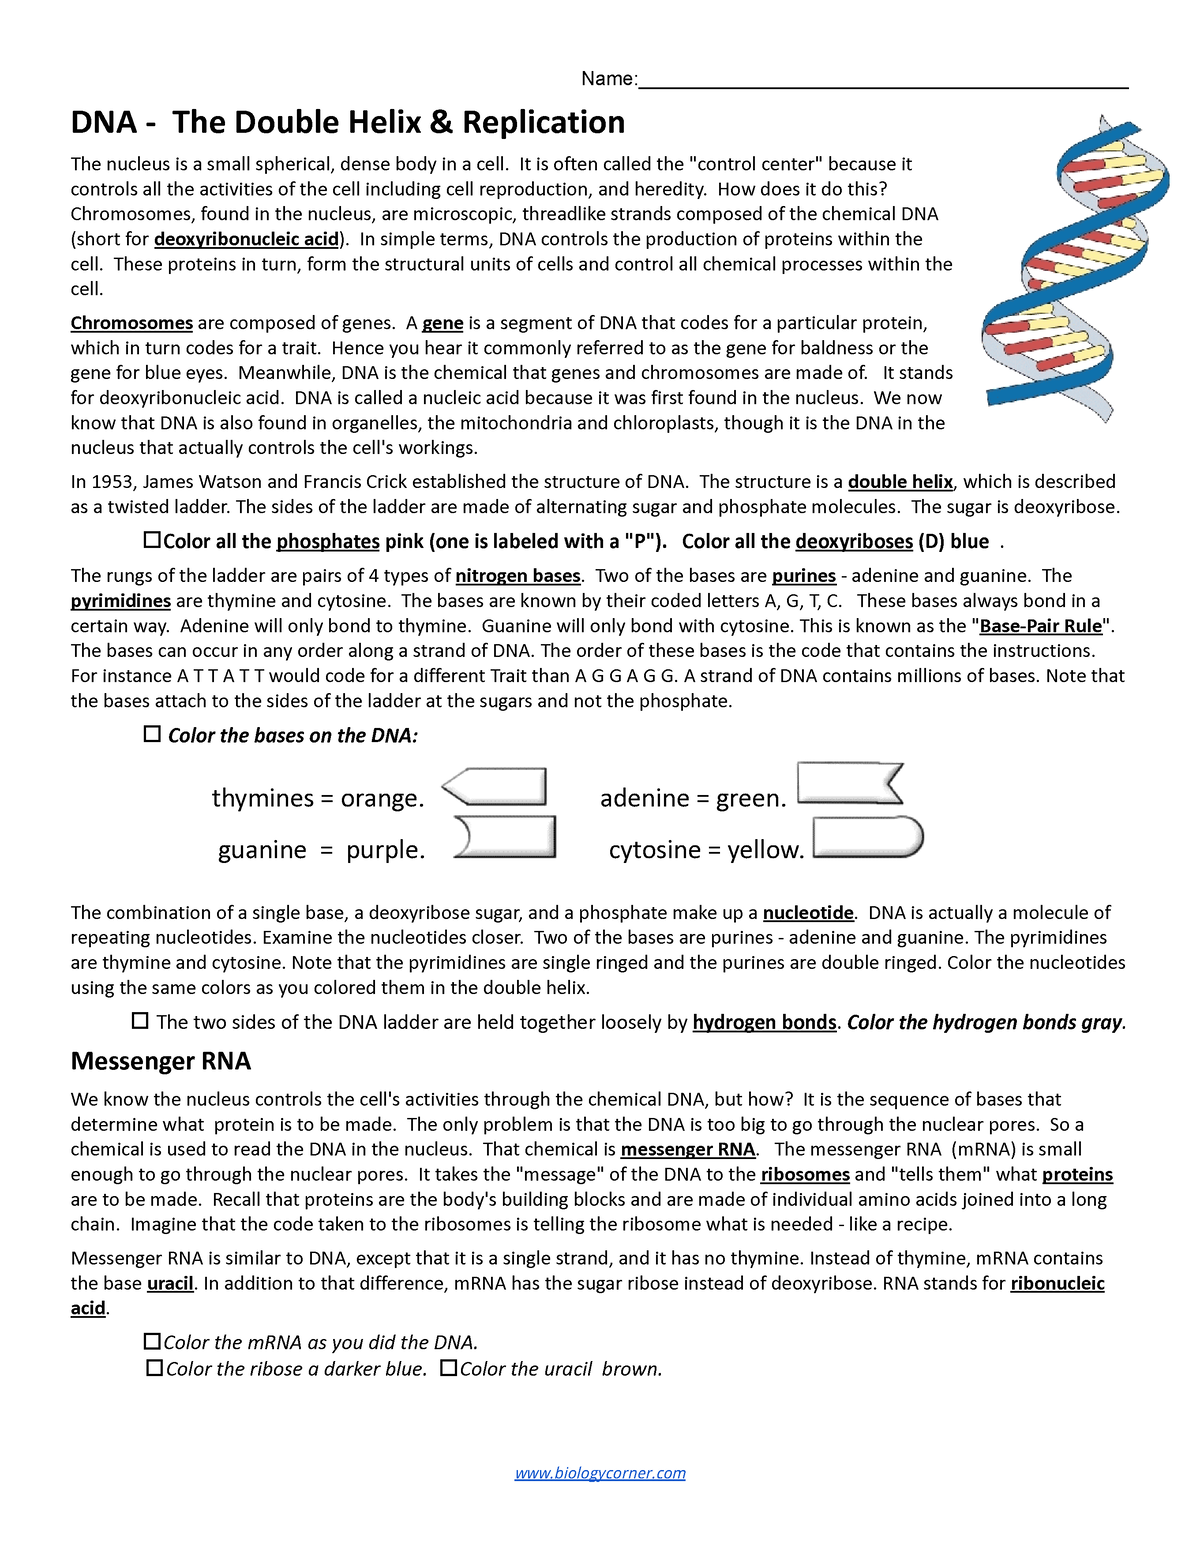 DNA and Replication Coloring - Google Docs - Name